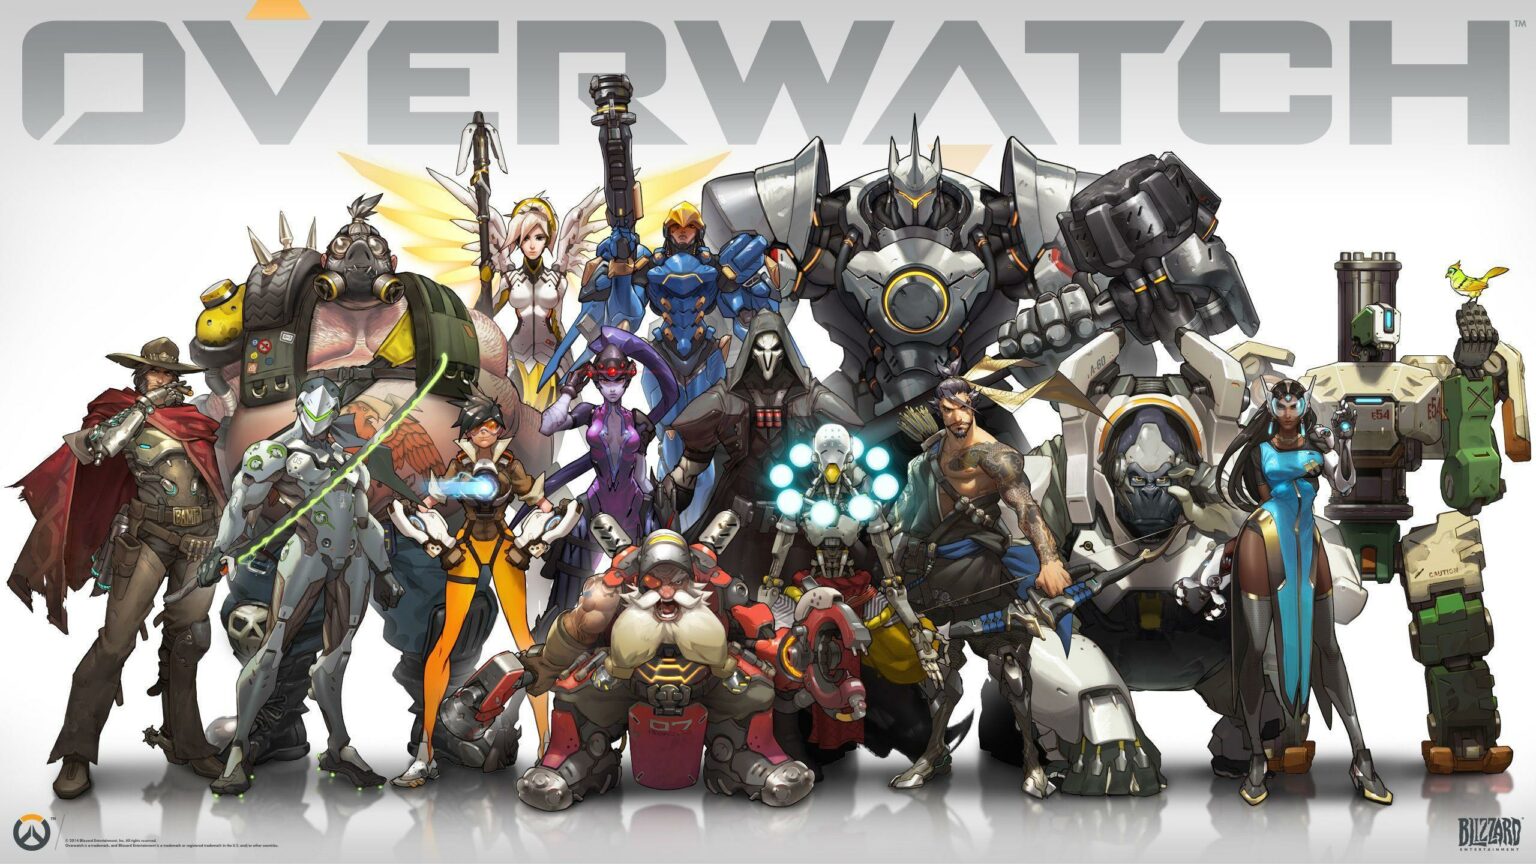 Play Overwatch For Free On PC Until January 4- Read More cover